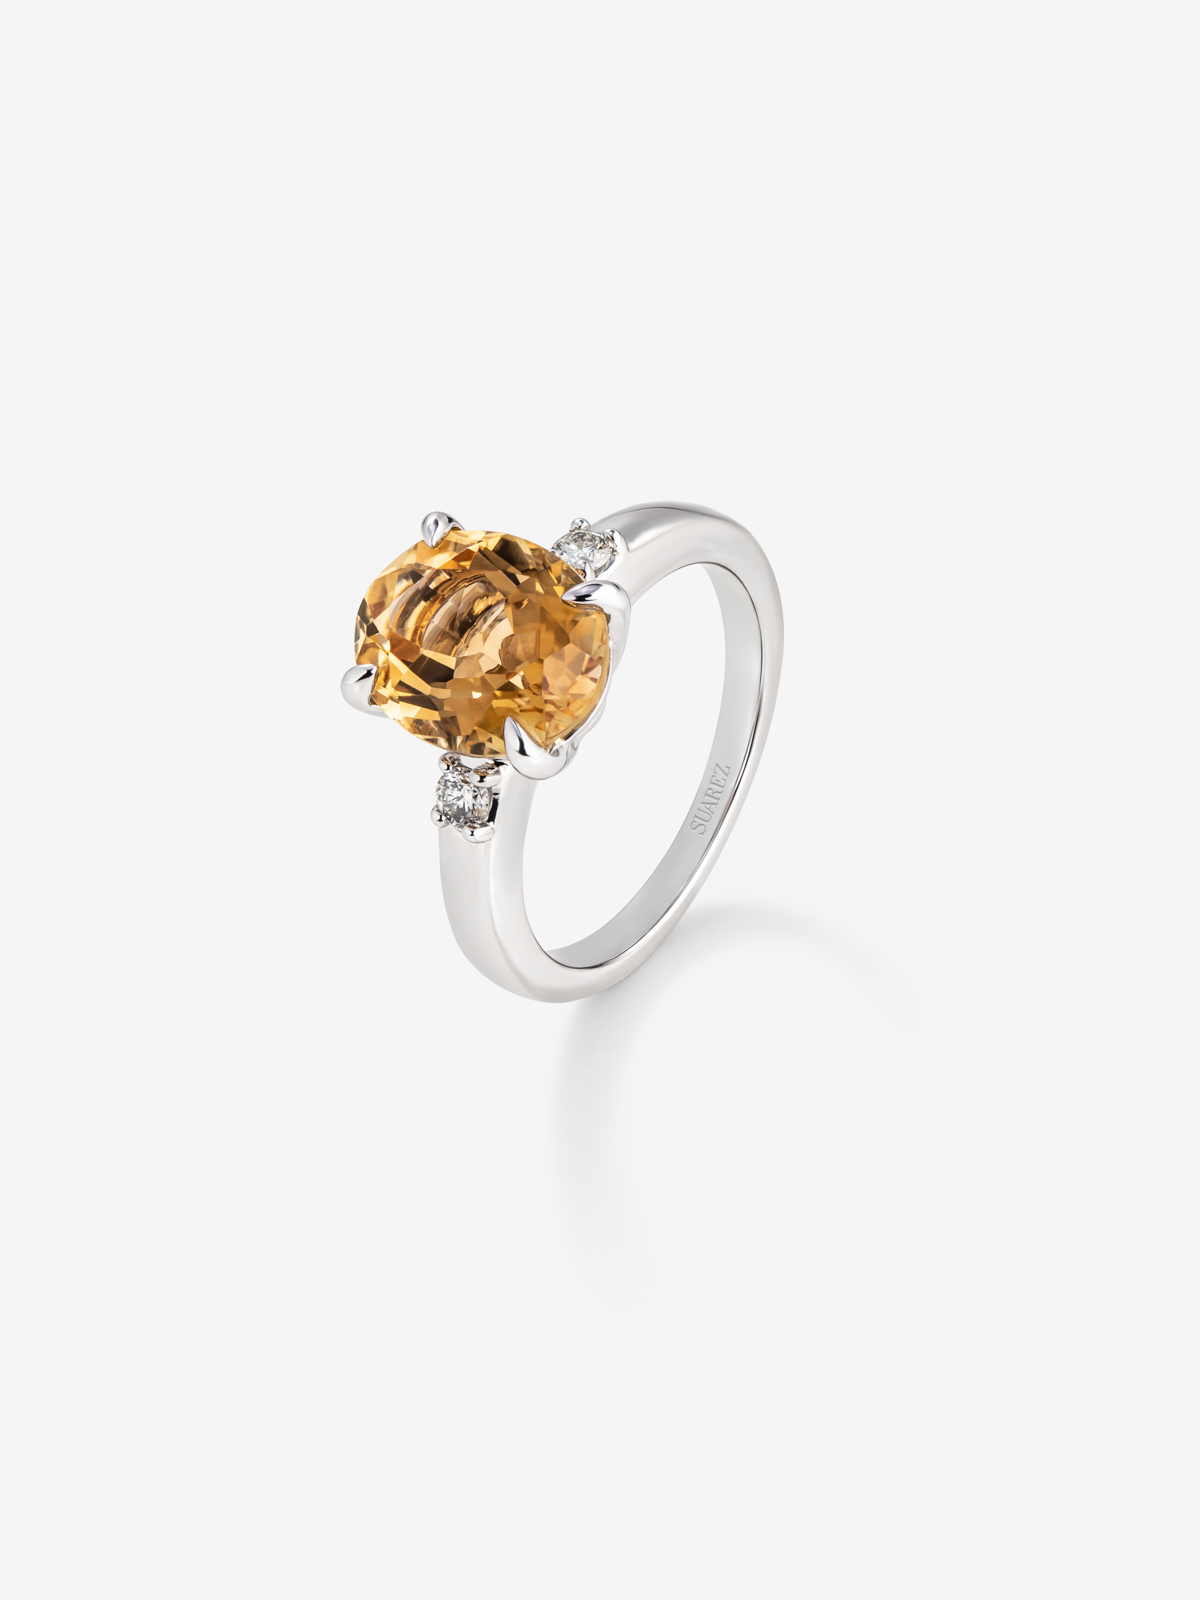 925 Silver triplet ring with citrine and diamonds.